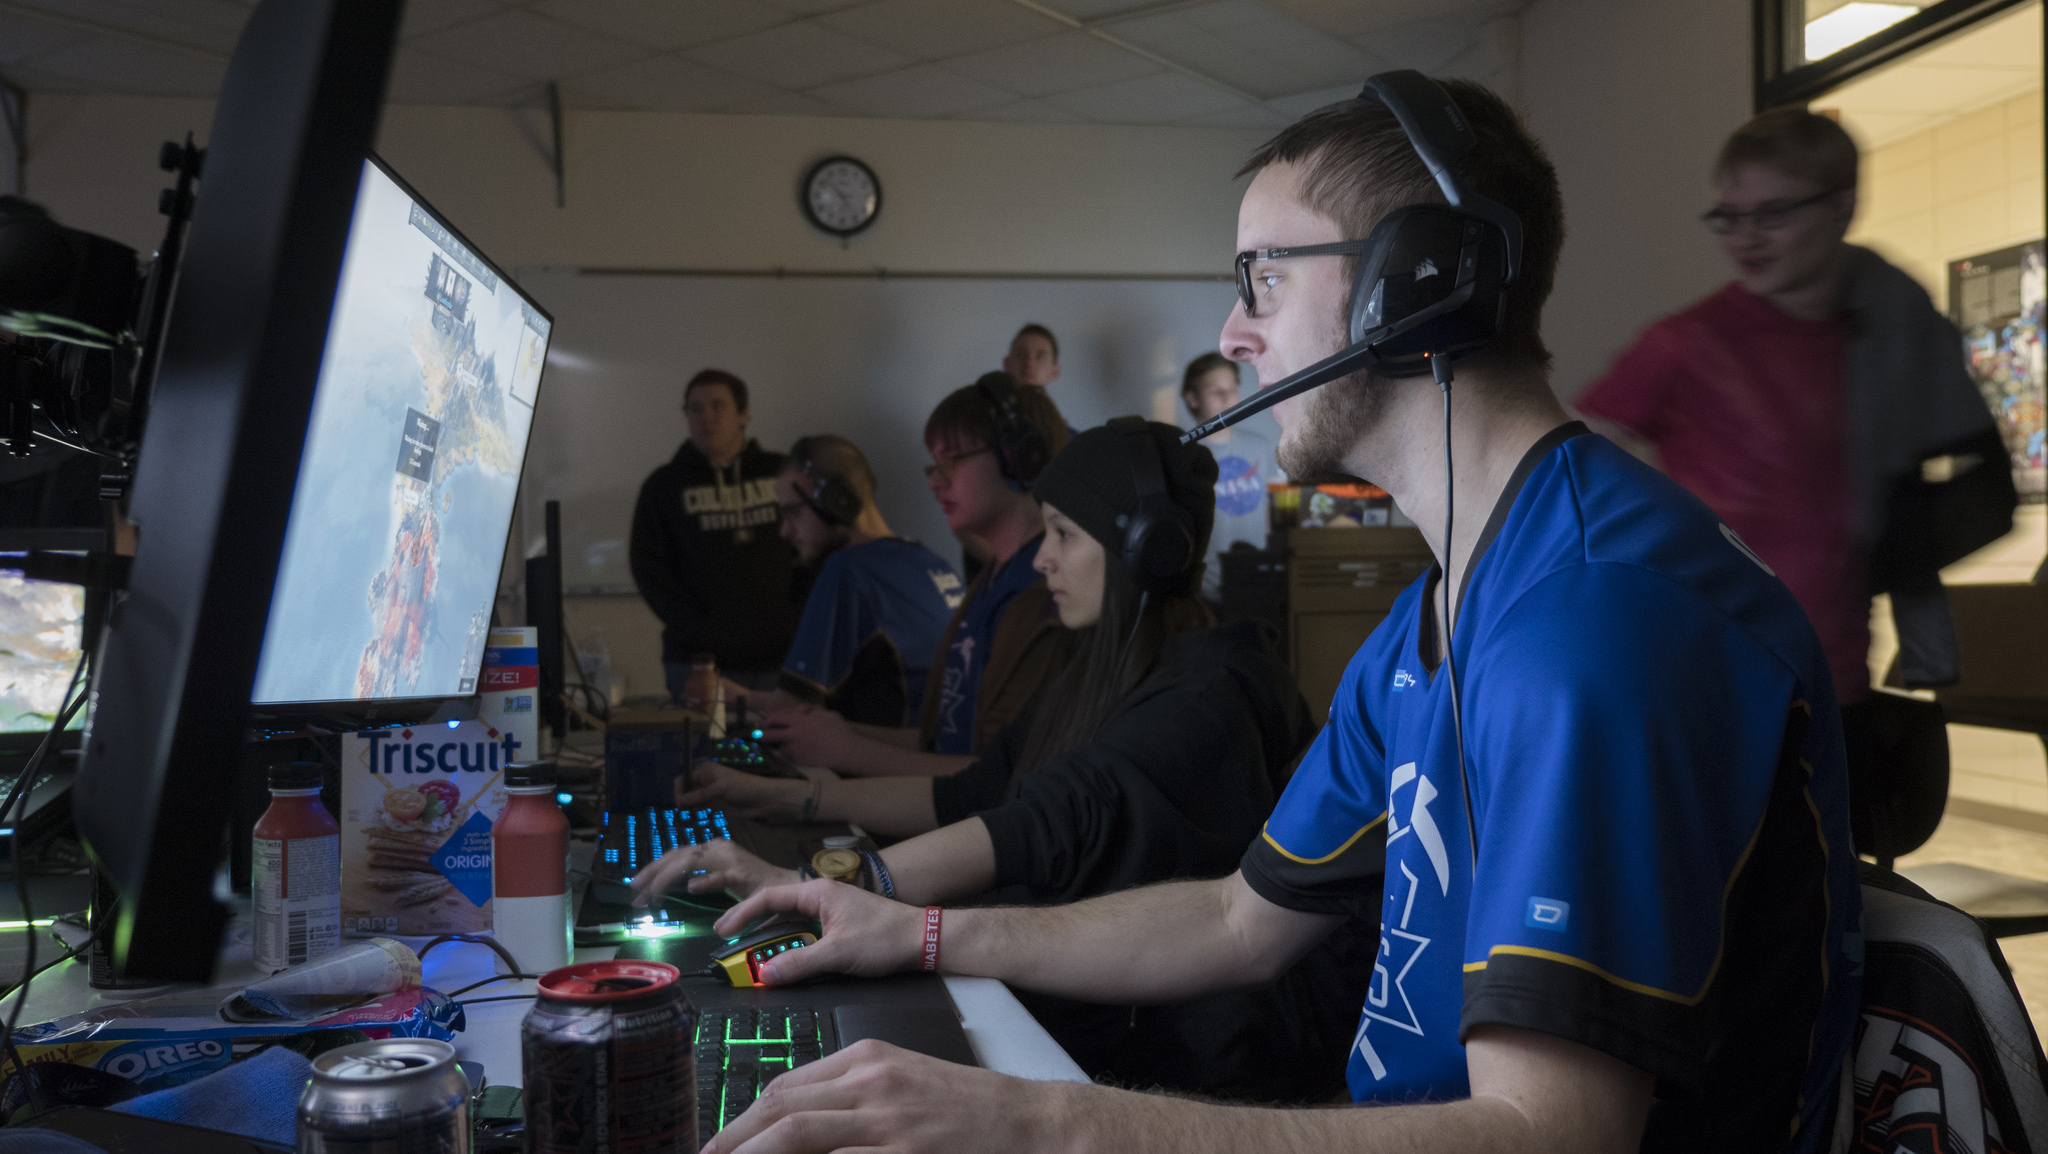 SD Mines Athletics Adds First Official Esports Program in South Dakota